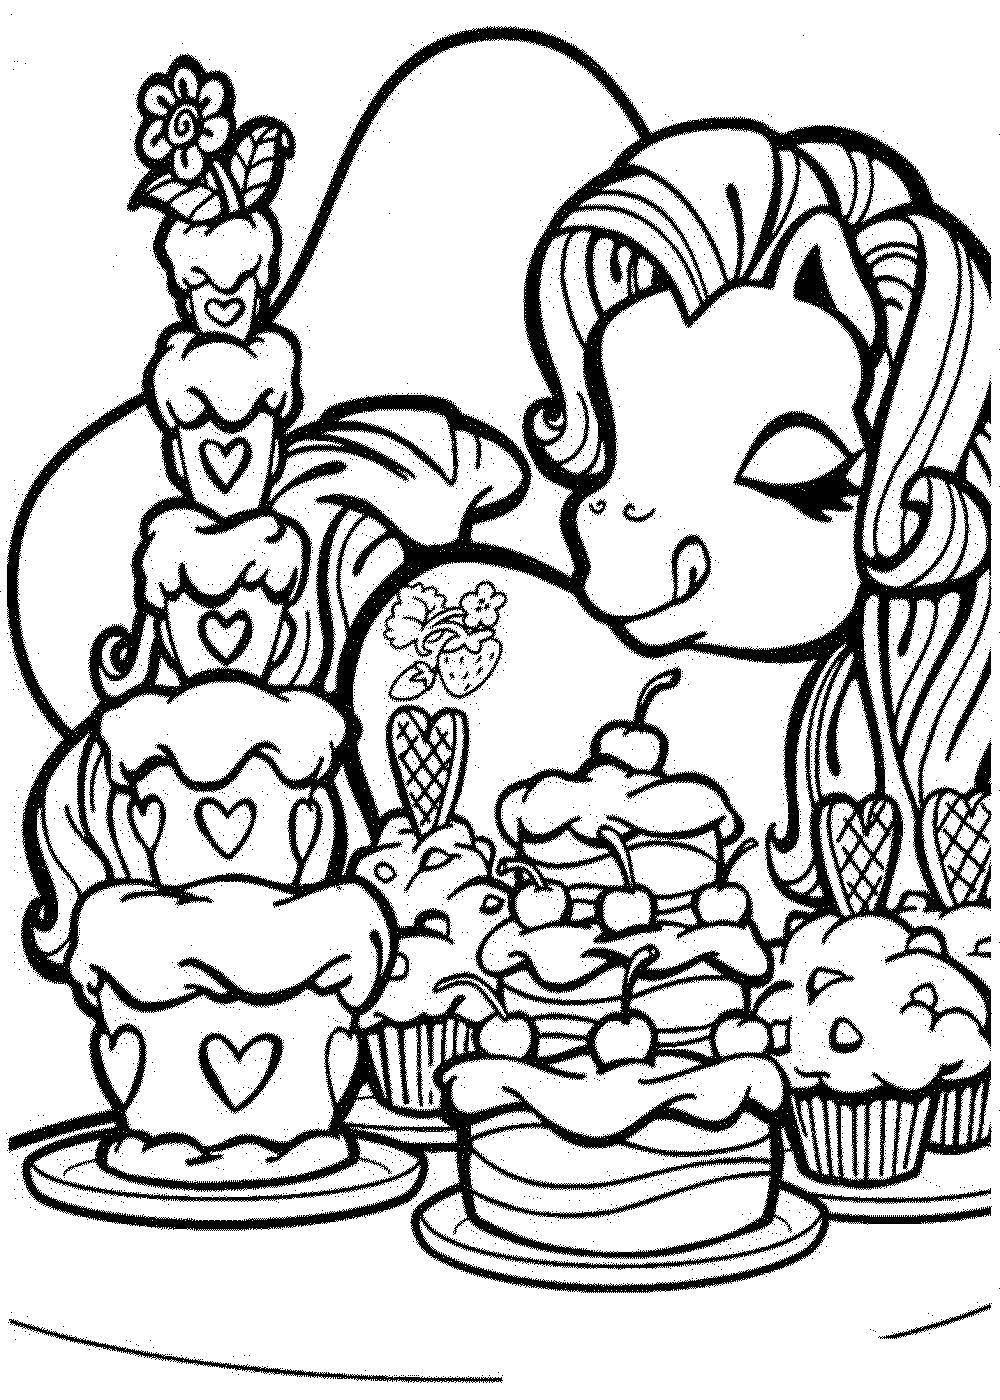 Coloring Pony likes sweets. Category my little pony. Tags:  Pony, My little pony .